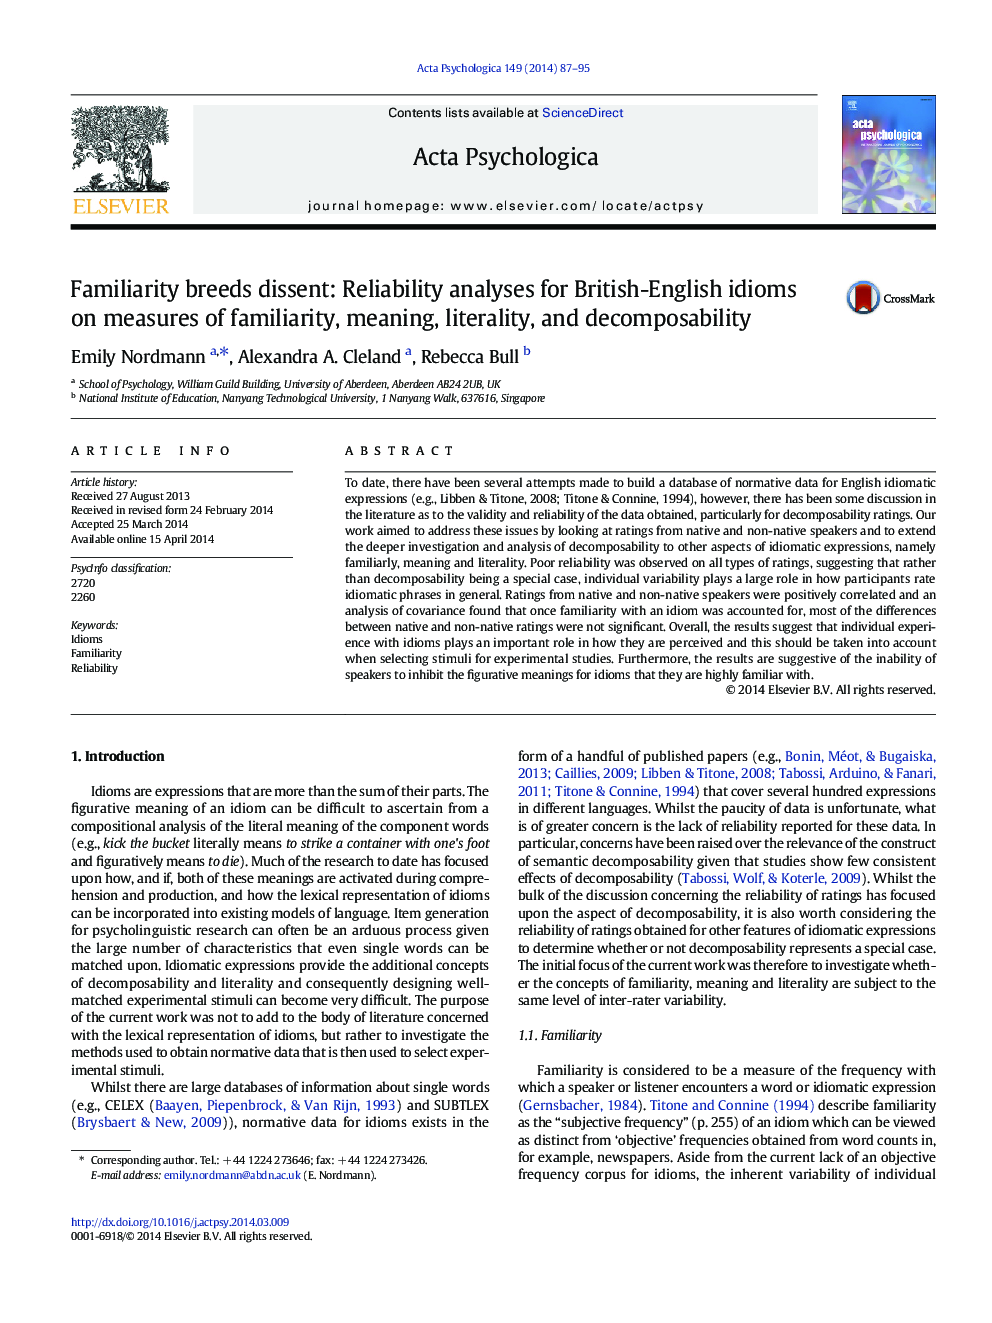 Familiarity breeds dissent: Reliability analyses for British-English idioms on measures of familiarity, meaning, literality, and decomposability